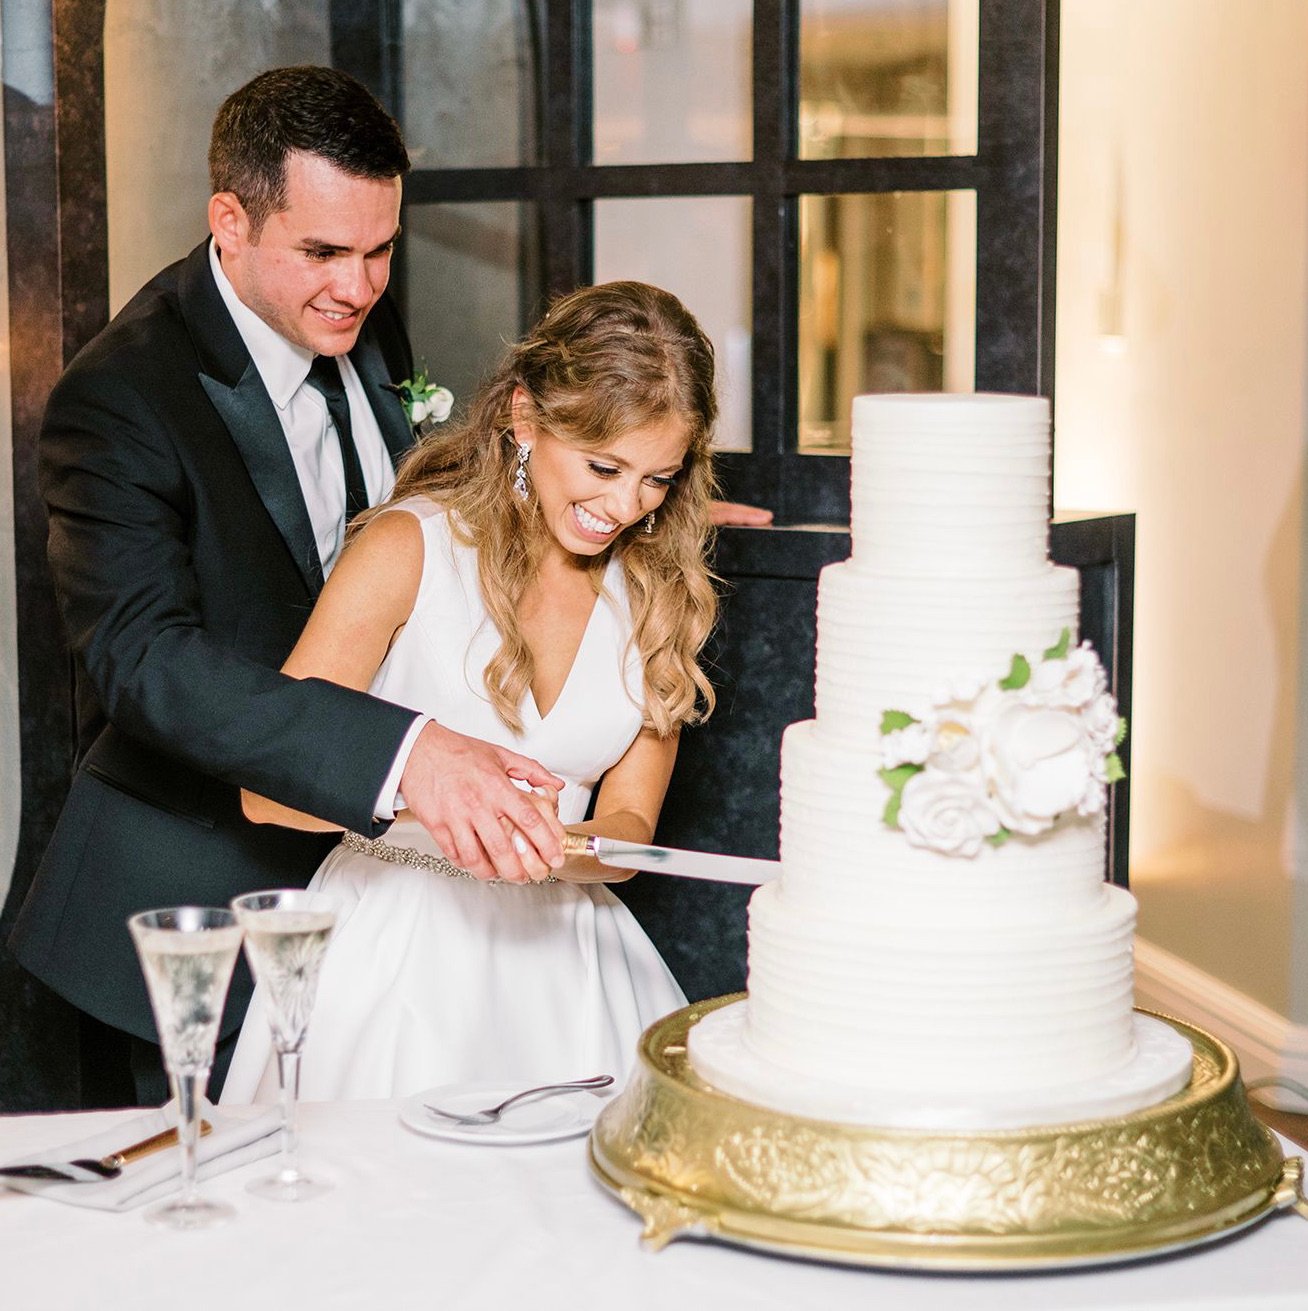 Bride and groom cut into their classic white, 4-tiered wedding cake while smiling.